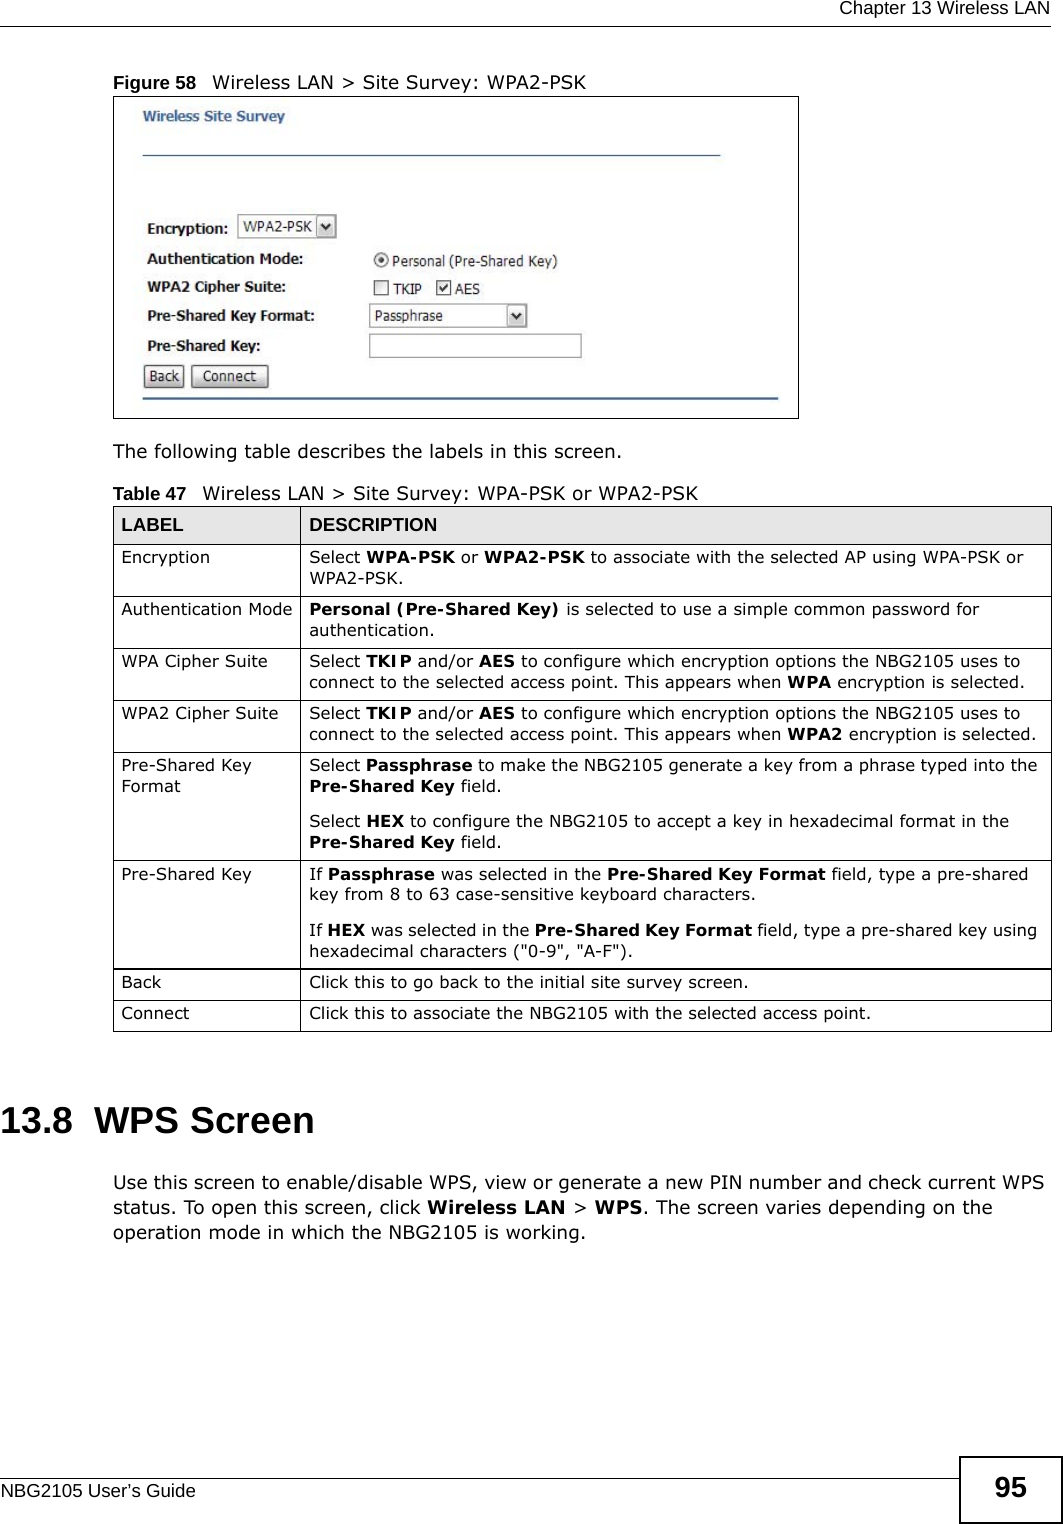  Chapter 13 Wireless LANNBG2105 User’s Guide 95Figure 58   Wireless LAN &gt; Site Survey: WPA2-PSKThe following table describes the labels in this screen.13.8  WPS ScreenUse this screen to enable/disable WPS, view or generate a new PIN number and check current WPS status. To open this screen, click Wireless LAN &gt; WPS. The screen varies depending on the operation mode in which the NBG2105 is working.Table 47   Wireless LAN &gt; Site Survey: WPA-PSK or WPA2-PSKLABEL DESCRIPTIONEncryption Select WPA-PSK or WPA2-PSK to associate with the selected AP using WPA-PSK or WPA2-PSK.Authentication Mode Personal (Pre-Shared Key) is selected to use a simple common password for authentication. WPA Cipher Suite Select TKIP and/or AES to configure which encryption options the NBG2105 uses to connect to the selected access point. This appears when WPA encryption is selected. WPA2 Cipher Suite Select TKIP and/or AES to configure which encryption options the NBG2105 uses to connect to the selected access point. This appears when WPA2 encryption is selected. Pre-Shared Key FormatSelect Passphrase to make the NBG2105 generate a key from a phrase typed into the Pre-Shared Key field.Select HEX to configure the NBG2105 to accept a key in hexadecimal format in the Pre-Shared Key field.Pre-Shared Key If Passphrase was selected in the Pre-Shared Key Format field, type a pre-shared key from 8 to 63 case-sensitive keyboard characters.If HEX was selected in the Pre-Shared Key Format field, type a pre-shared key using hexadecimal characters (&quot;0-9&quot;, &quot;A-F&quot;).Back Click this to go back to the initial site survey screen.Connect Click this to associate the NBG2105 with the selected access point.